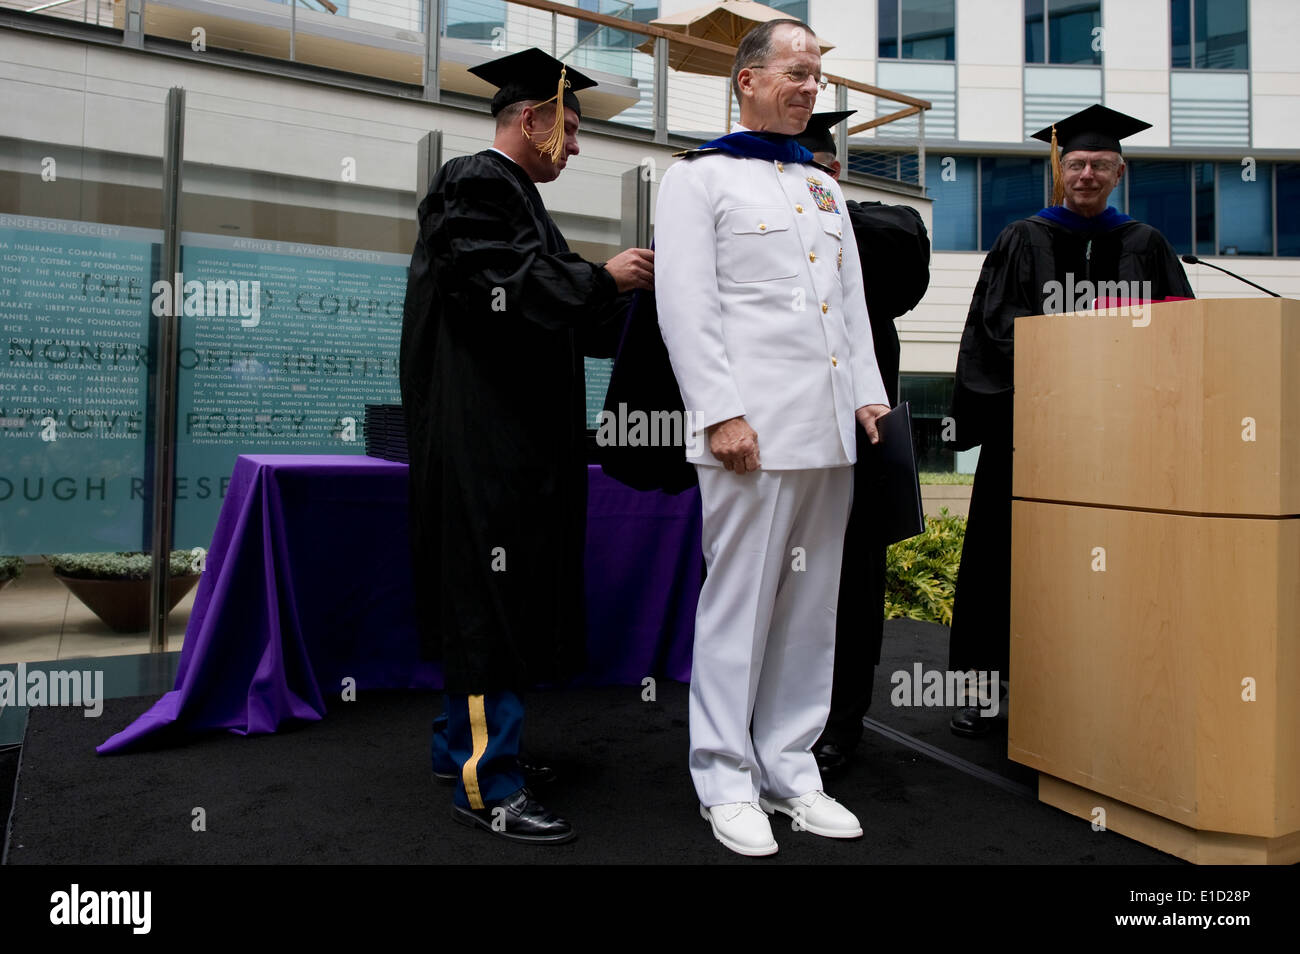 Chairman of the Joint Chiefs of Staff Navy Adm. Mike Mullen is presented with an honorary degree before speaking at the Frederi Stock Photo